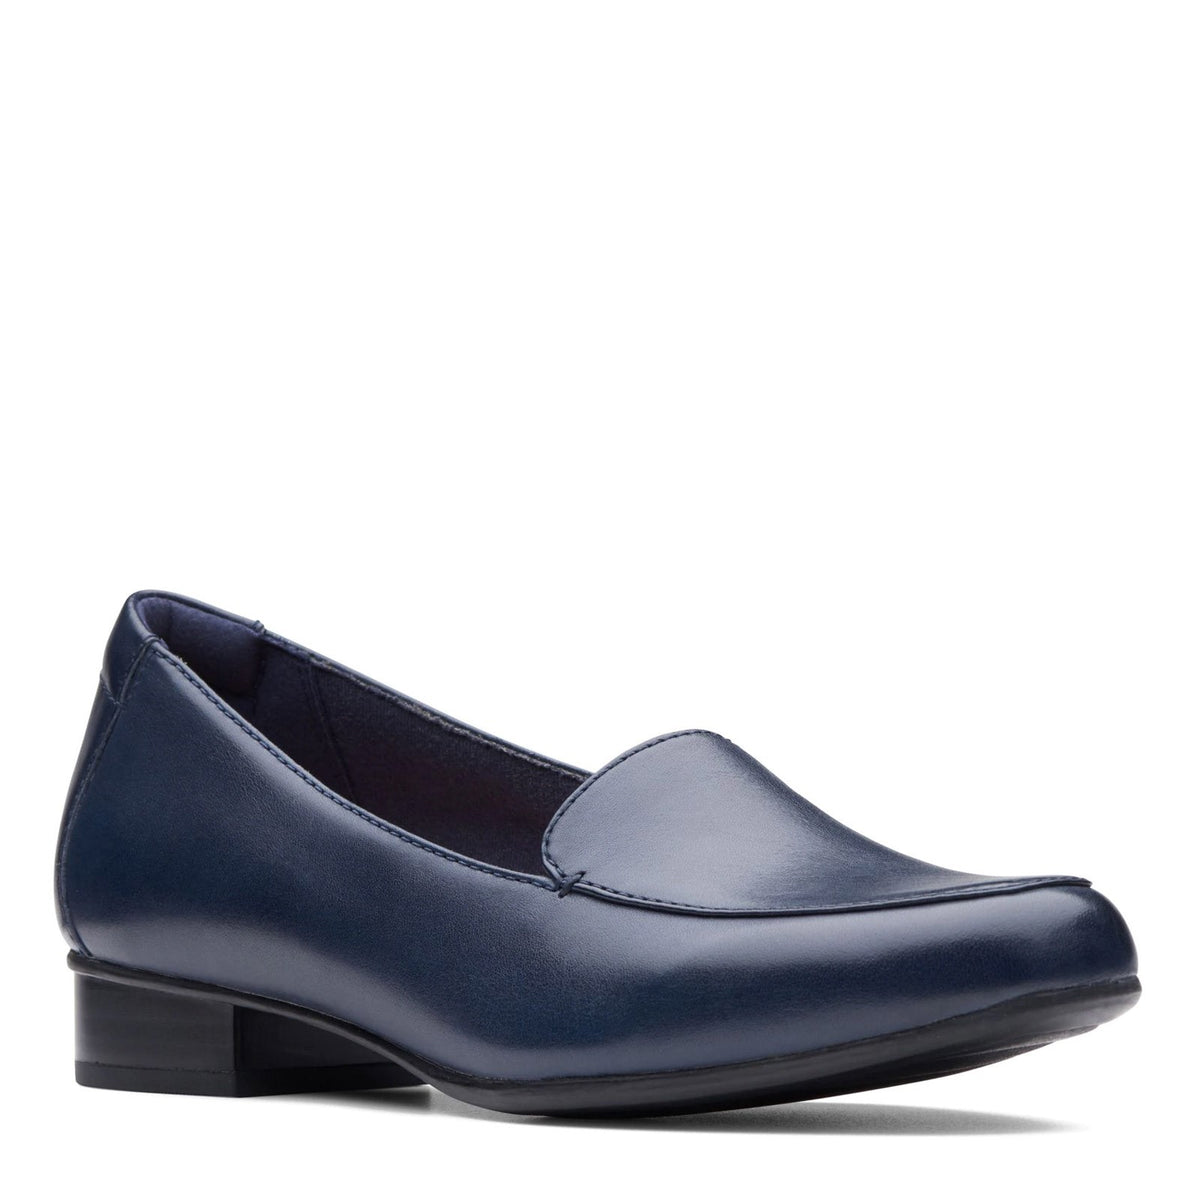 Clarks Un Blush Ease Loafer - Black Leather – Valentino's Comfort 